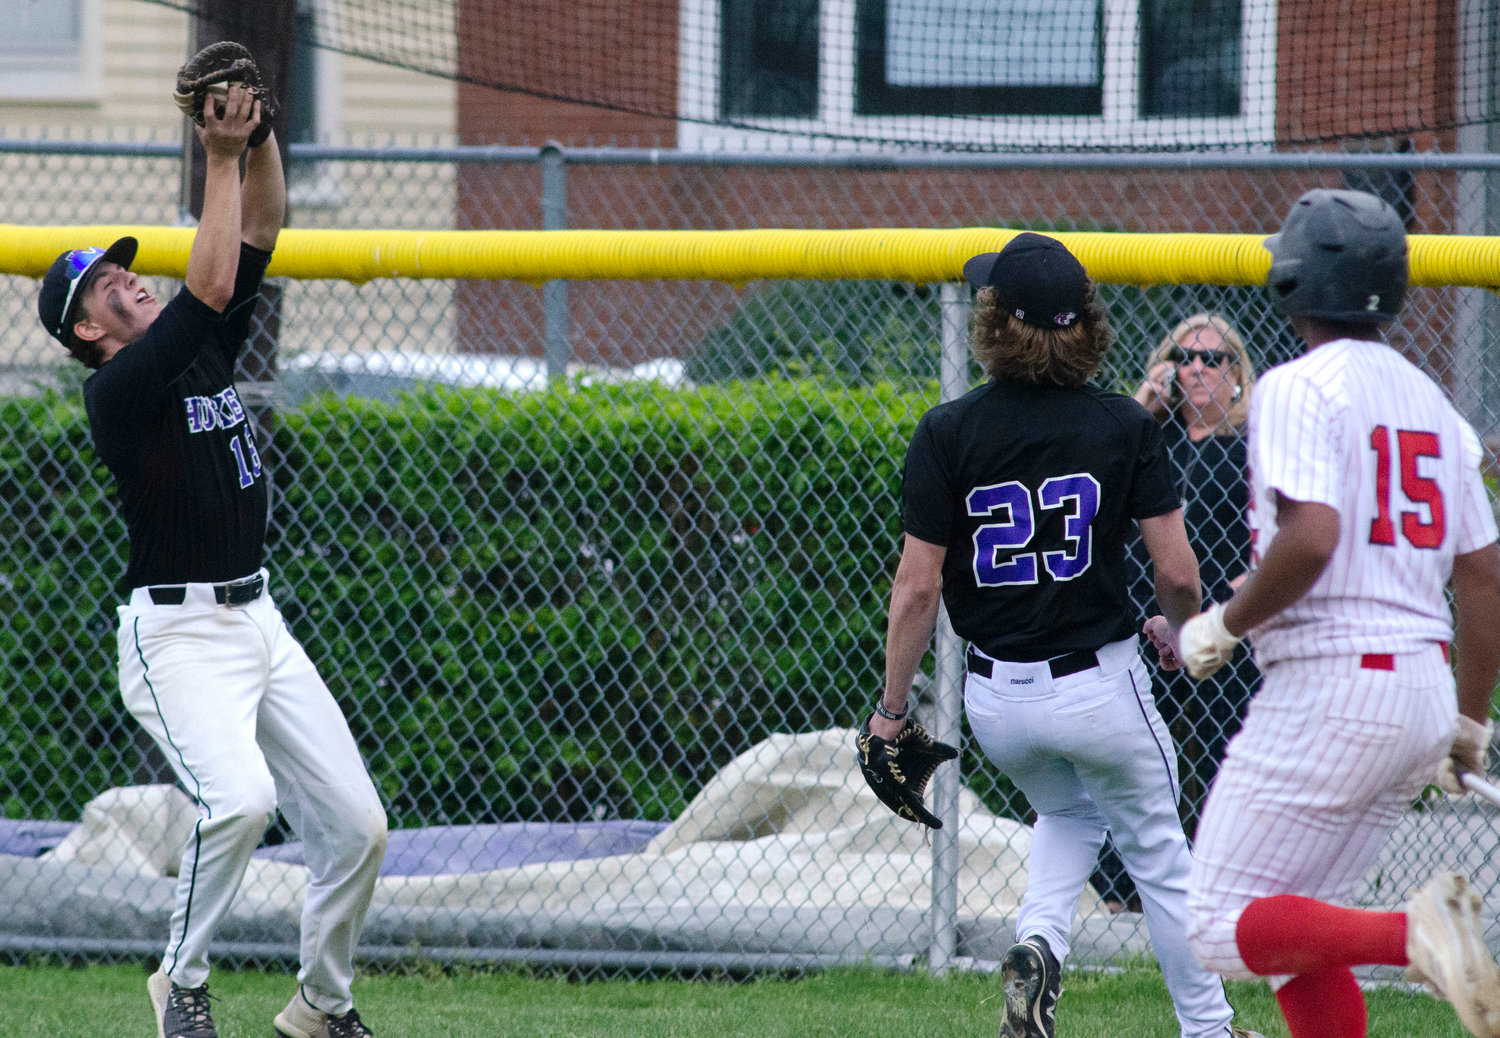 First baseman Matt Gale catches a fly ball in foul territory for an out, with pitcher Brad Denson looking on.